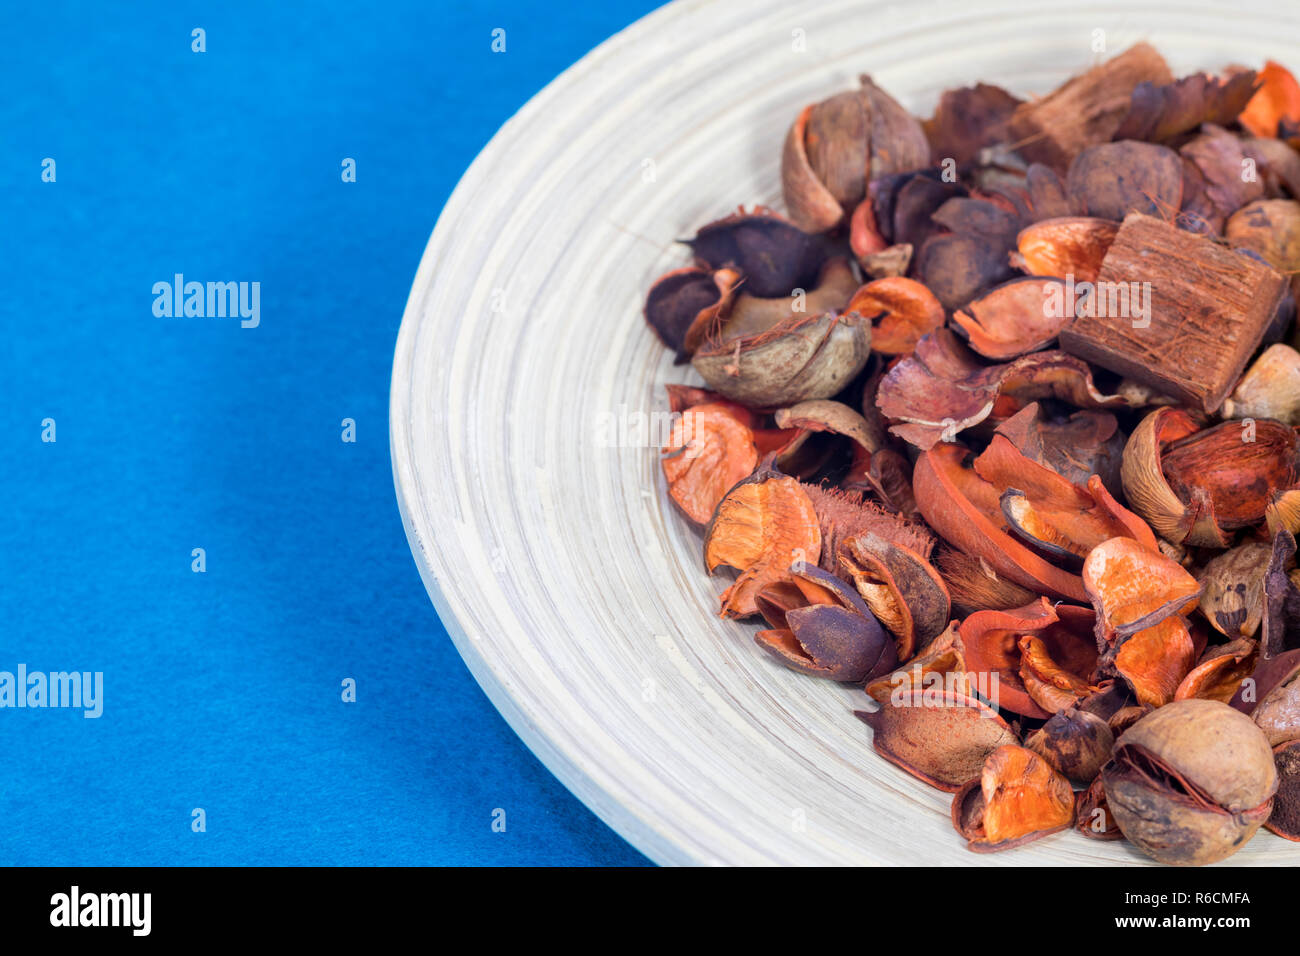 Aromatic Potpourri Close Up view in the wooden plate Stock Photo